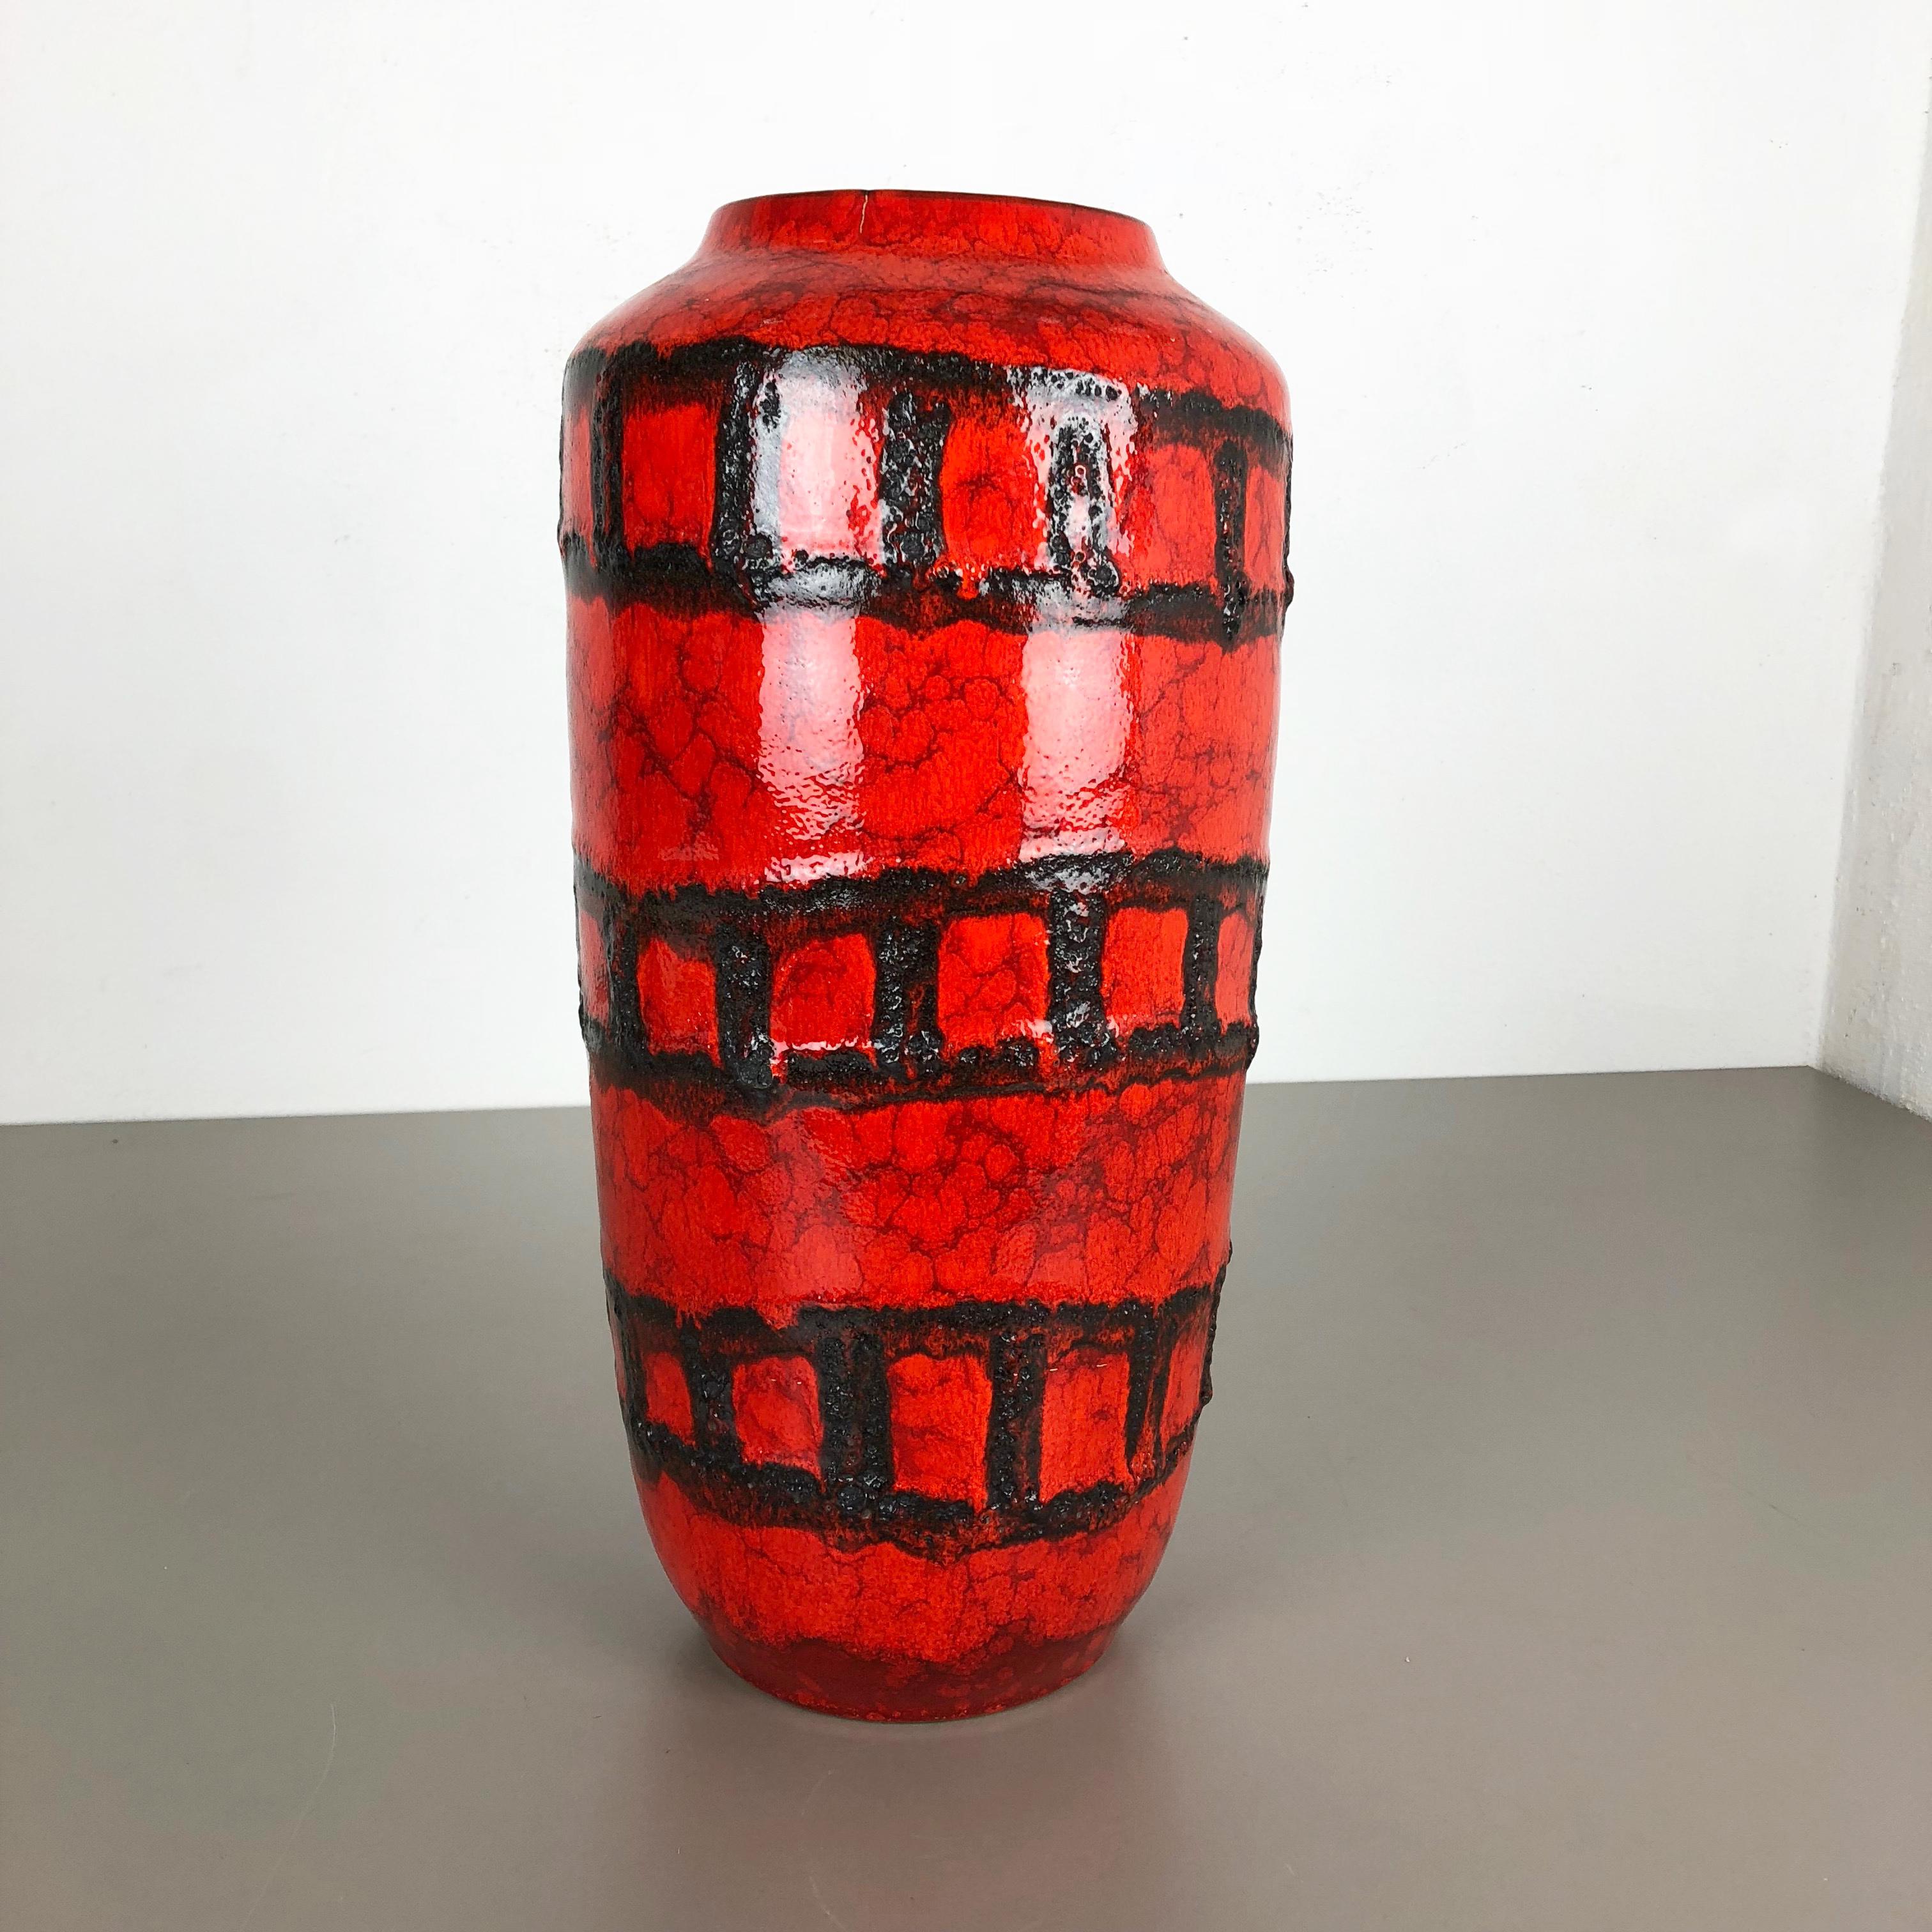 Article:

Fat lava art vase extra large version


Model: 517-45


Producer:

Scheurich, Germany



Decade:

1970s


Description:

This original vintage vase was produced in the 1970s in Germany. It is made of ceramic pottery in